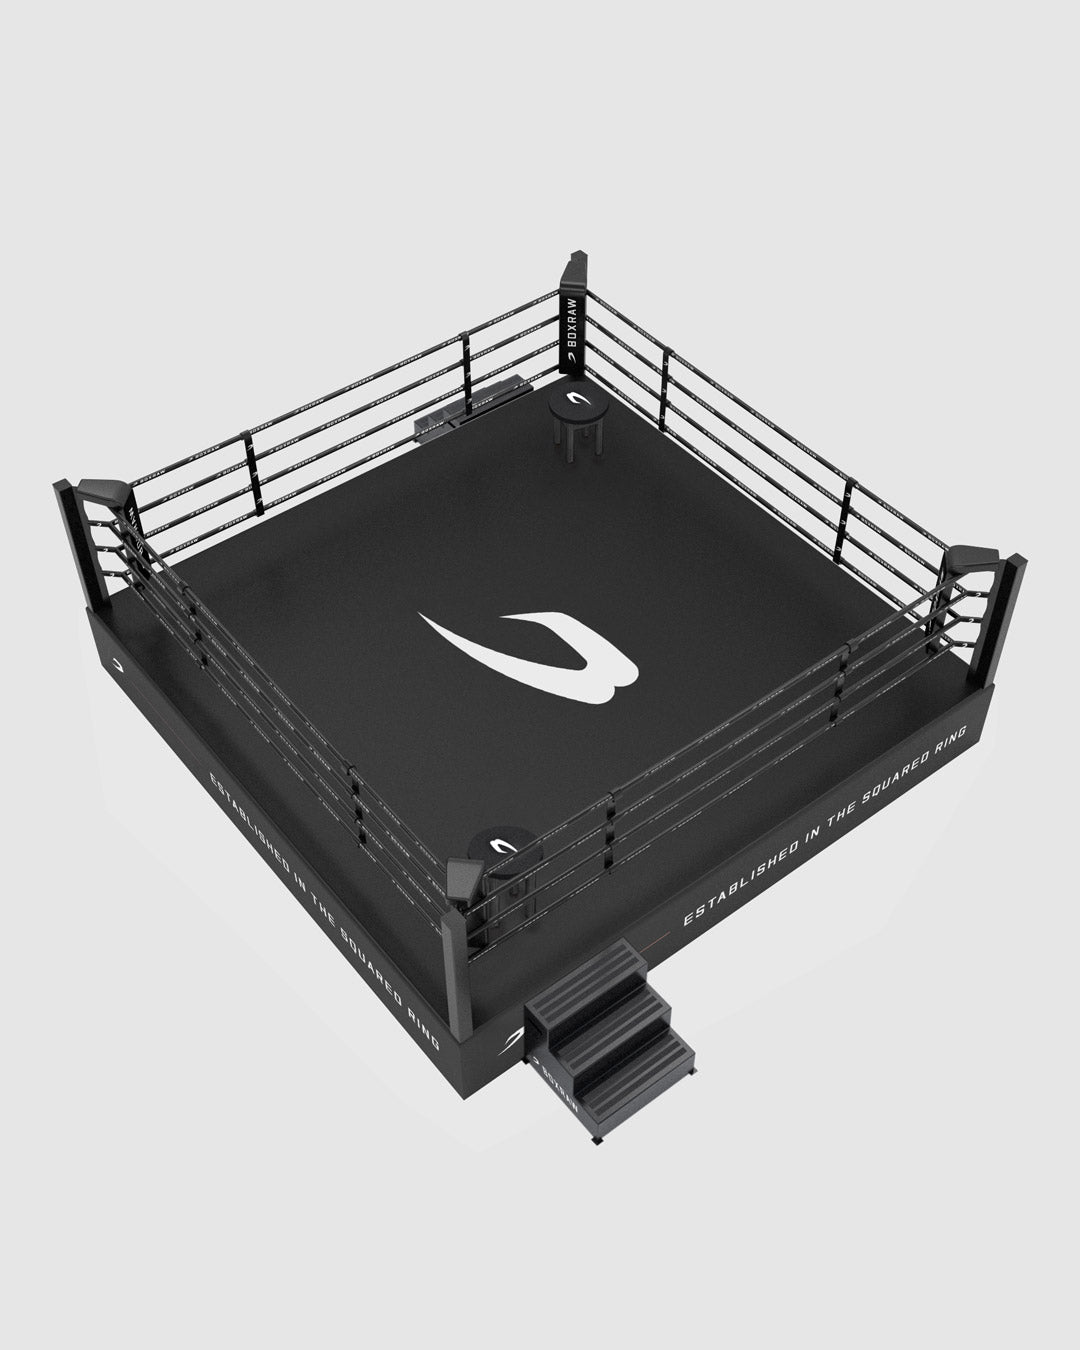 Olympic boxing ring 7,8x7,8m (No IBA certification ) | Premium Manufacturer  of Martial arts & Boxing, MMA Equipments | STEDYX